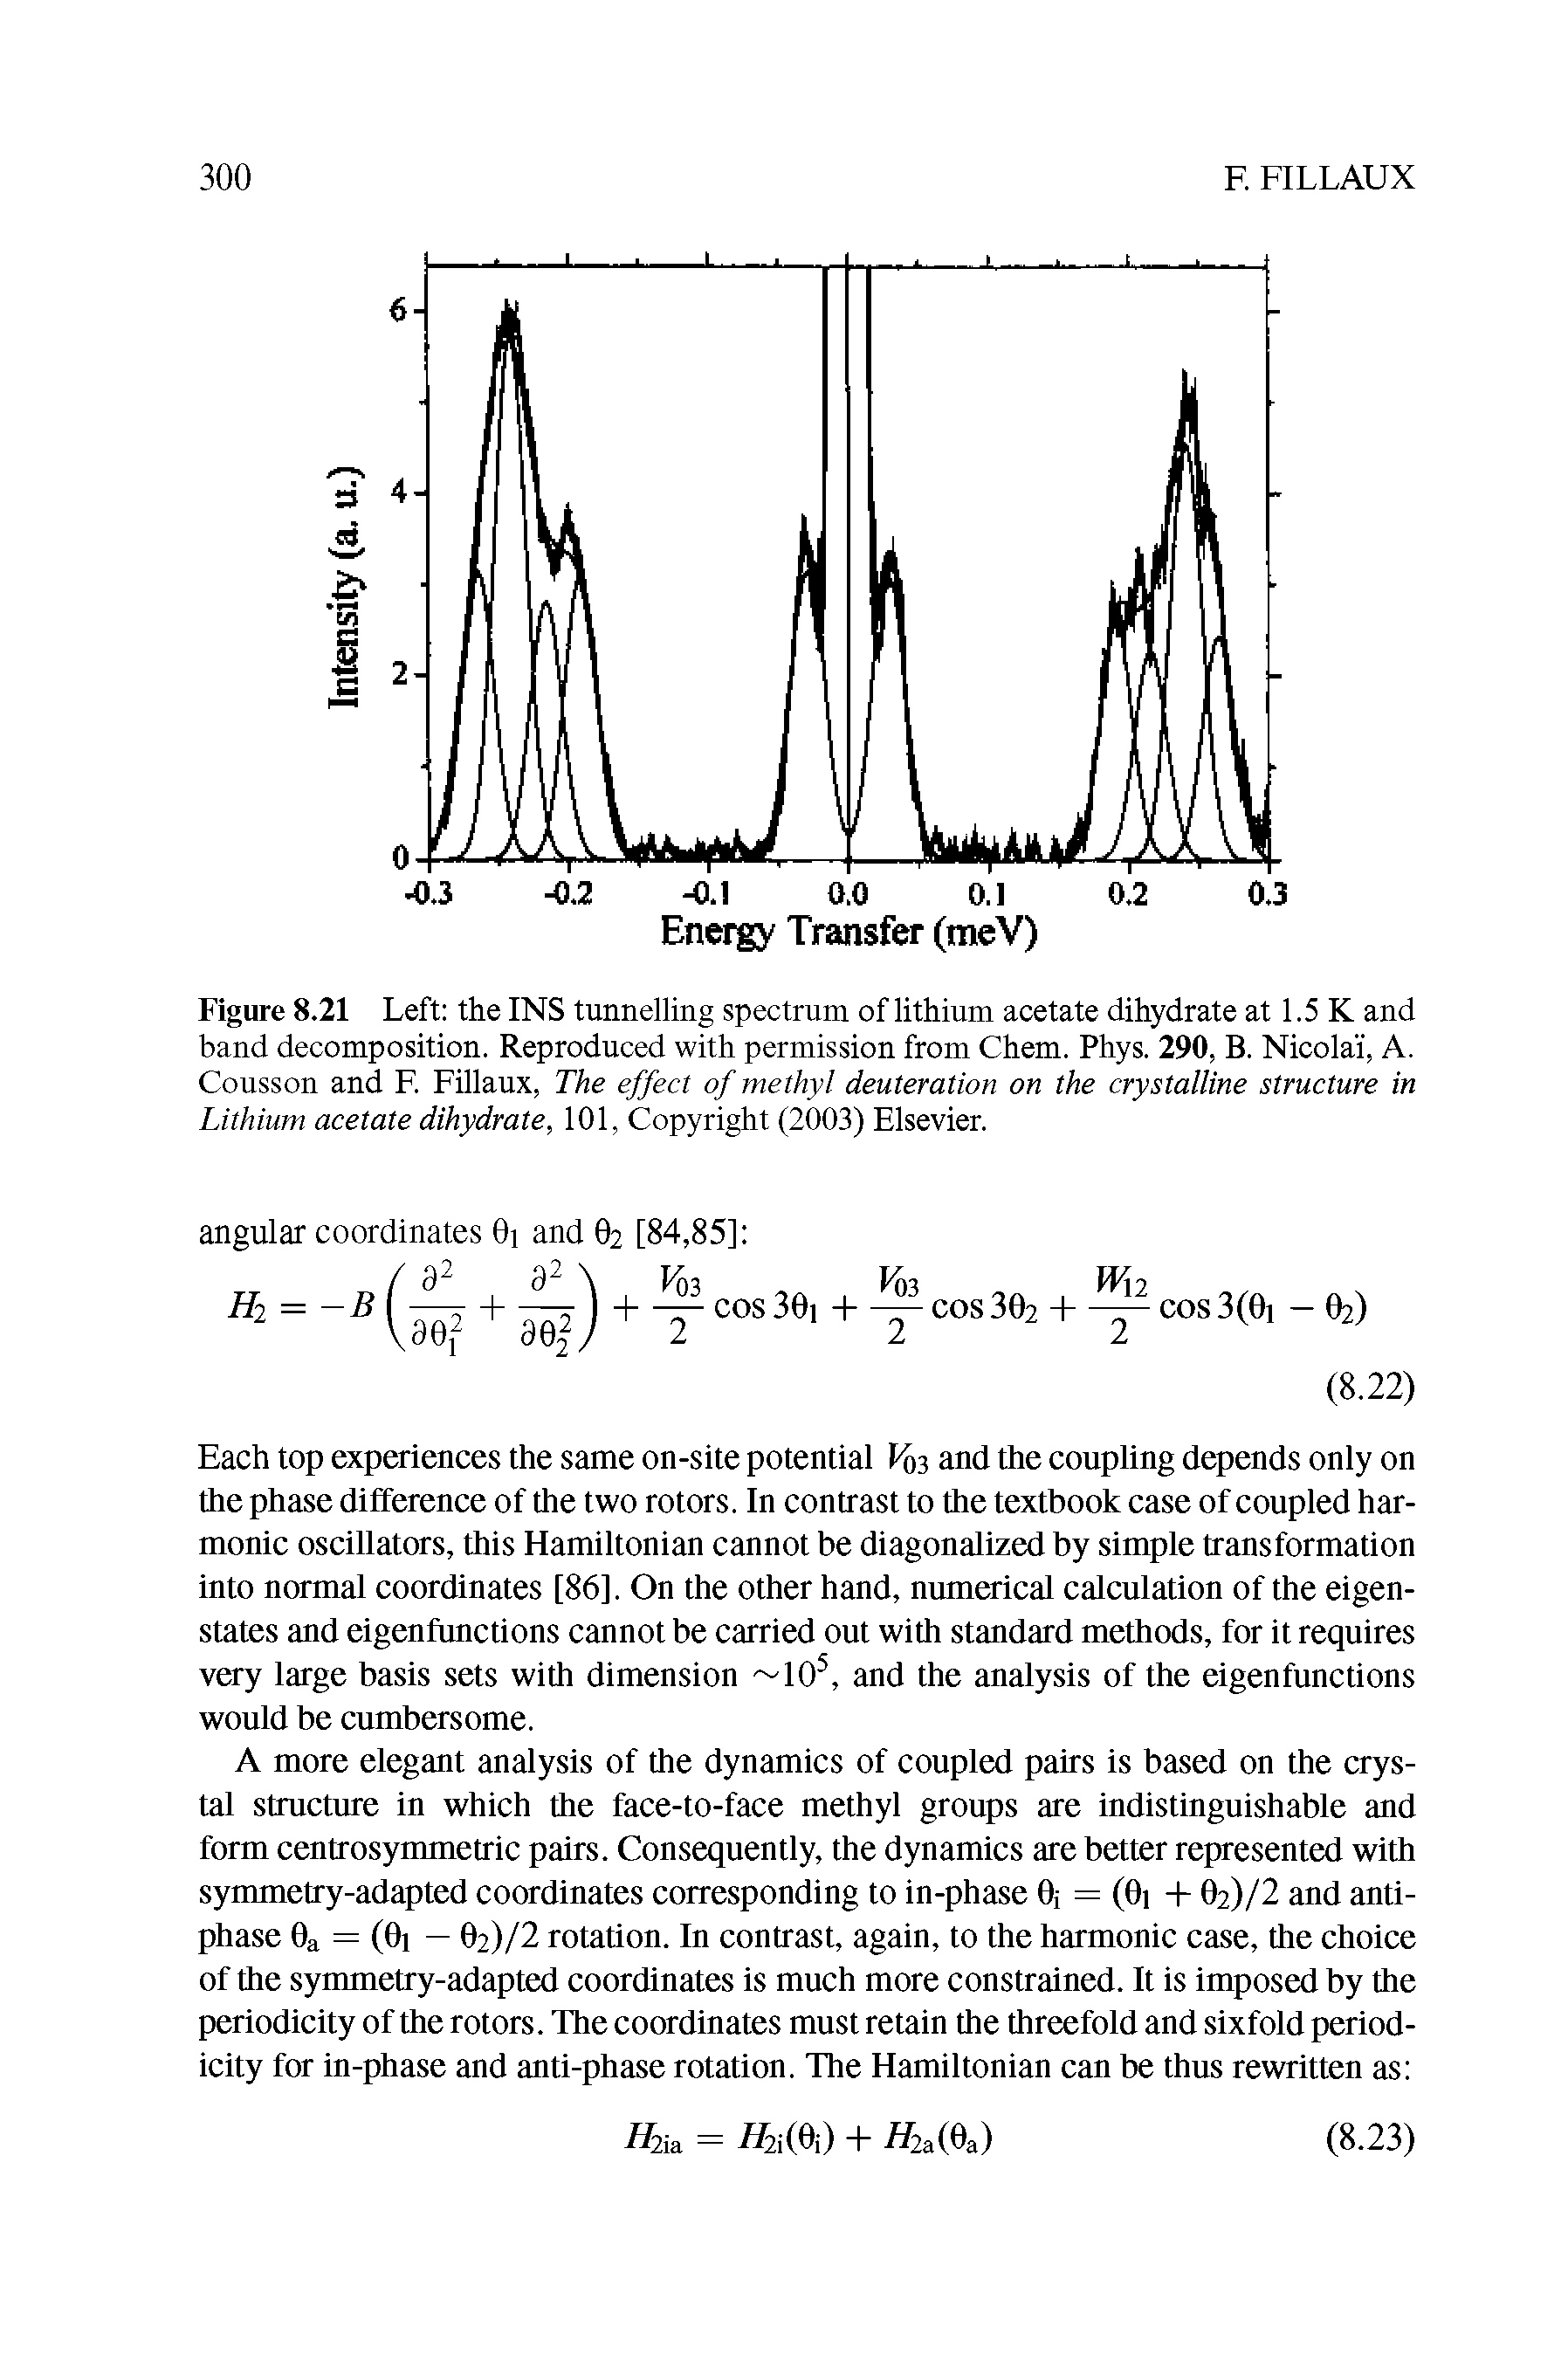 Figure 8.21 Left the INS tunnelling spectrum of lithium acetate dihydrate at 1.5 K and band decomposition. Reproduced with permission from Chem. Phys. 290, B. Nicolai, A. Cousson and F FUlaux, The effect of methyl deuteration on the crystalline structure in Lithium acetate dihydrate, 101, Copyright (2003) Elsevier.